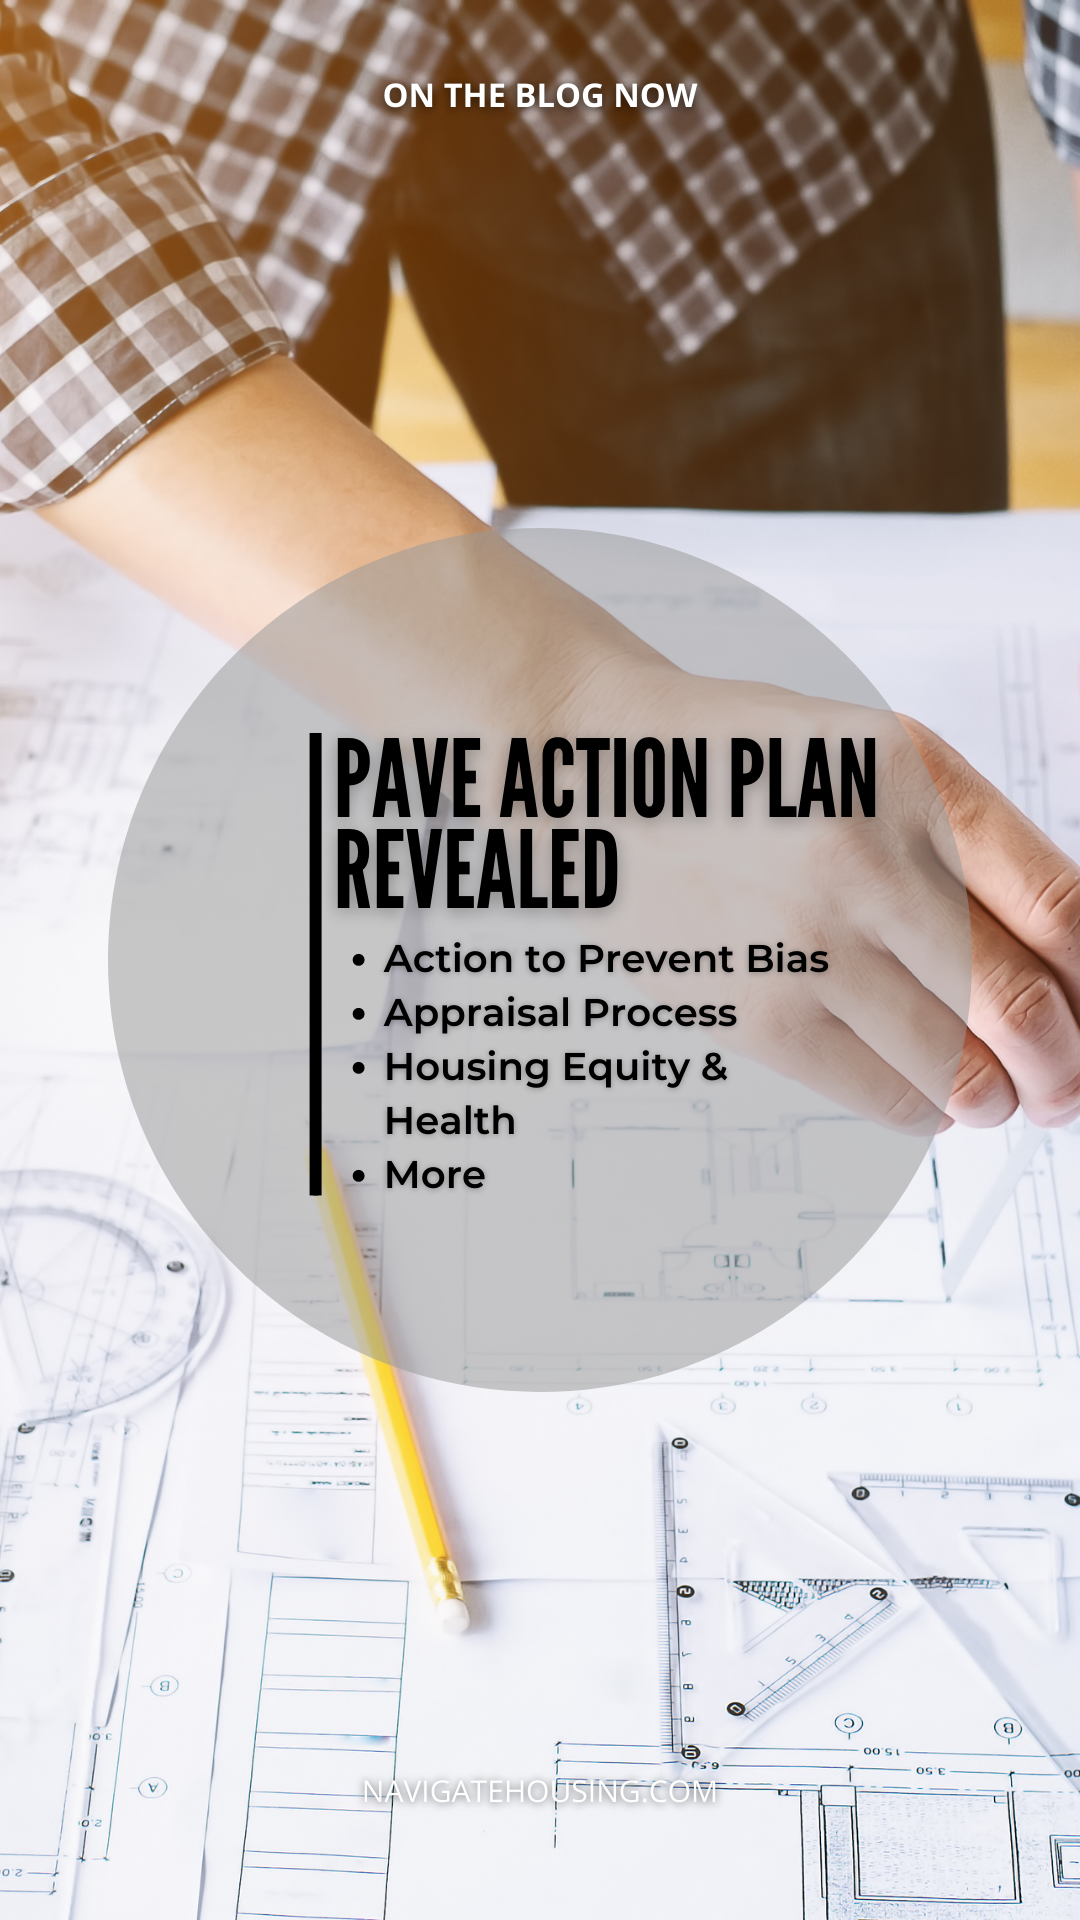 PAVE Action Plan